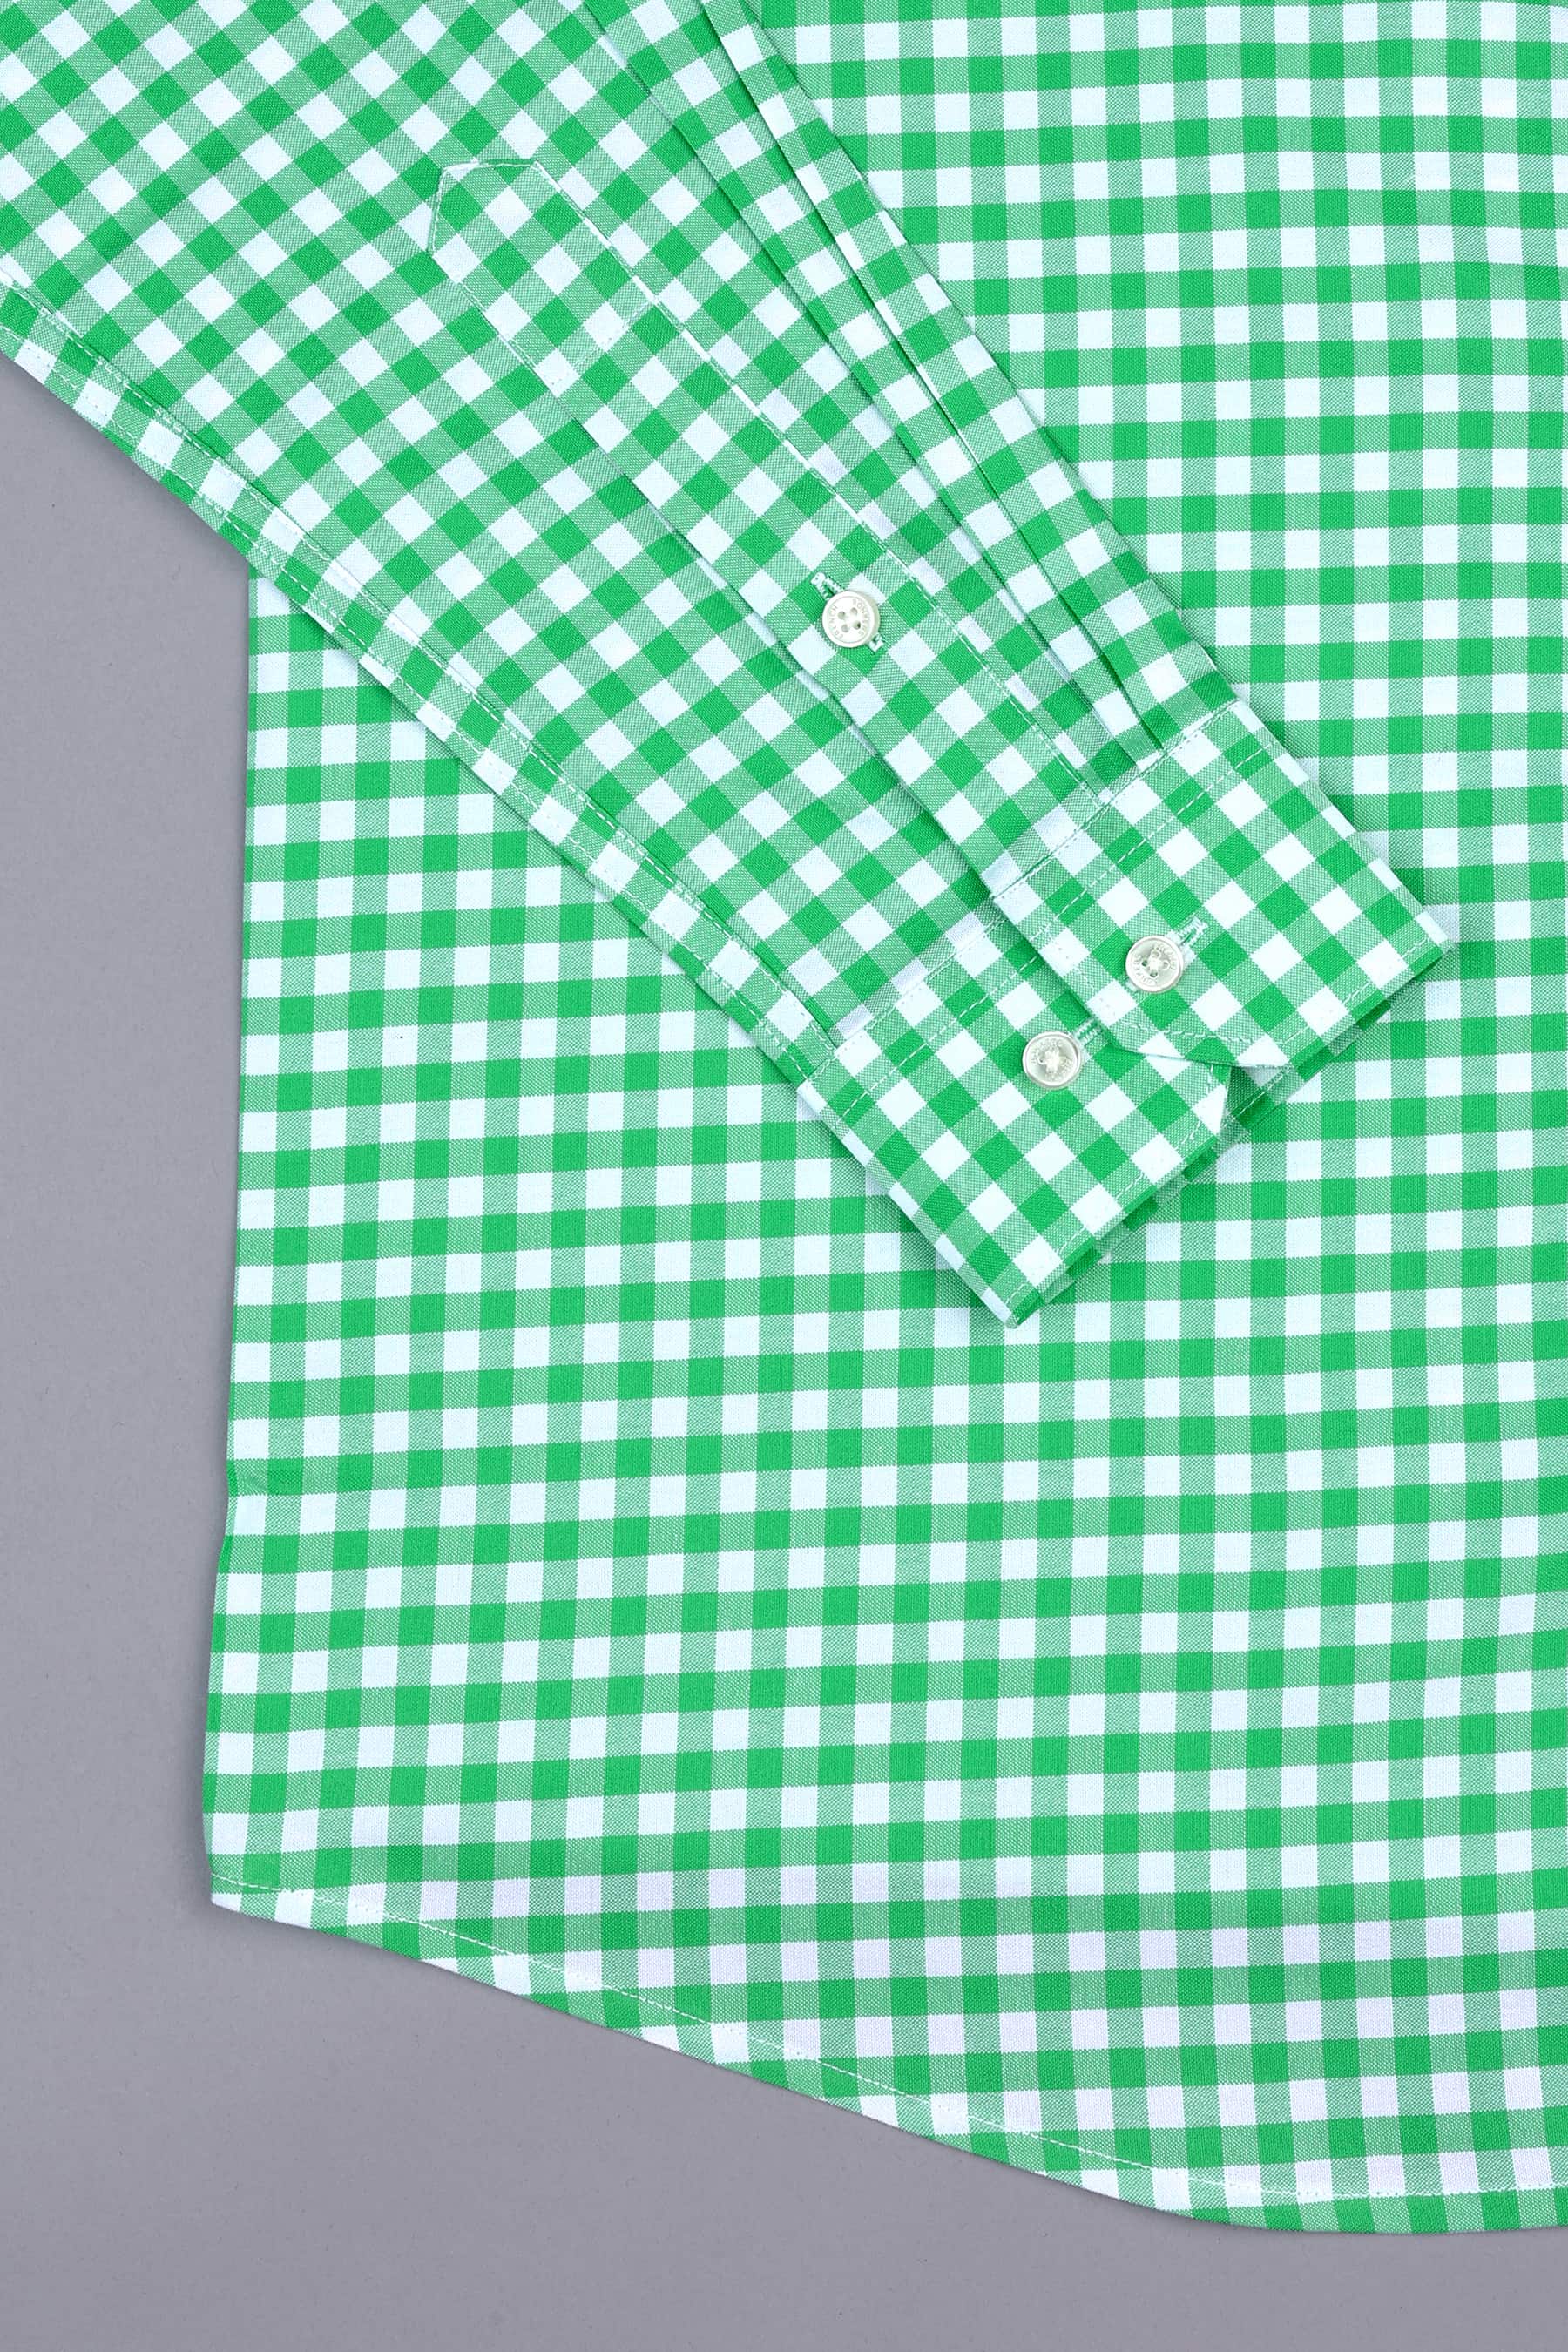 Seafoam green with white oxford gingham check shirt